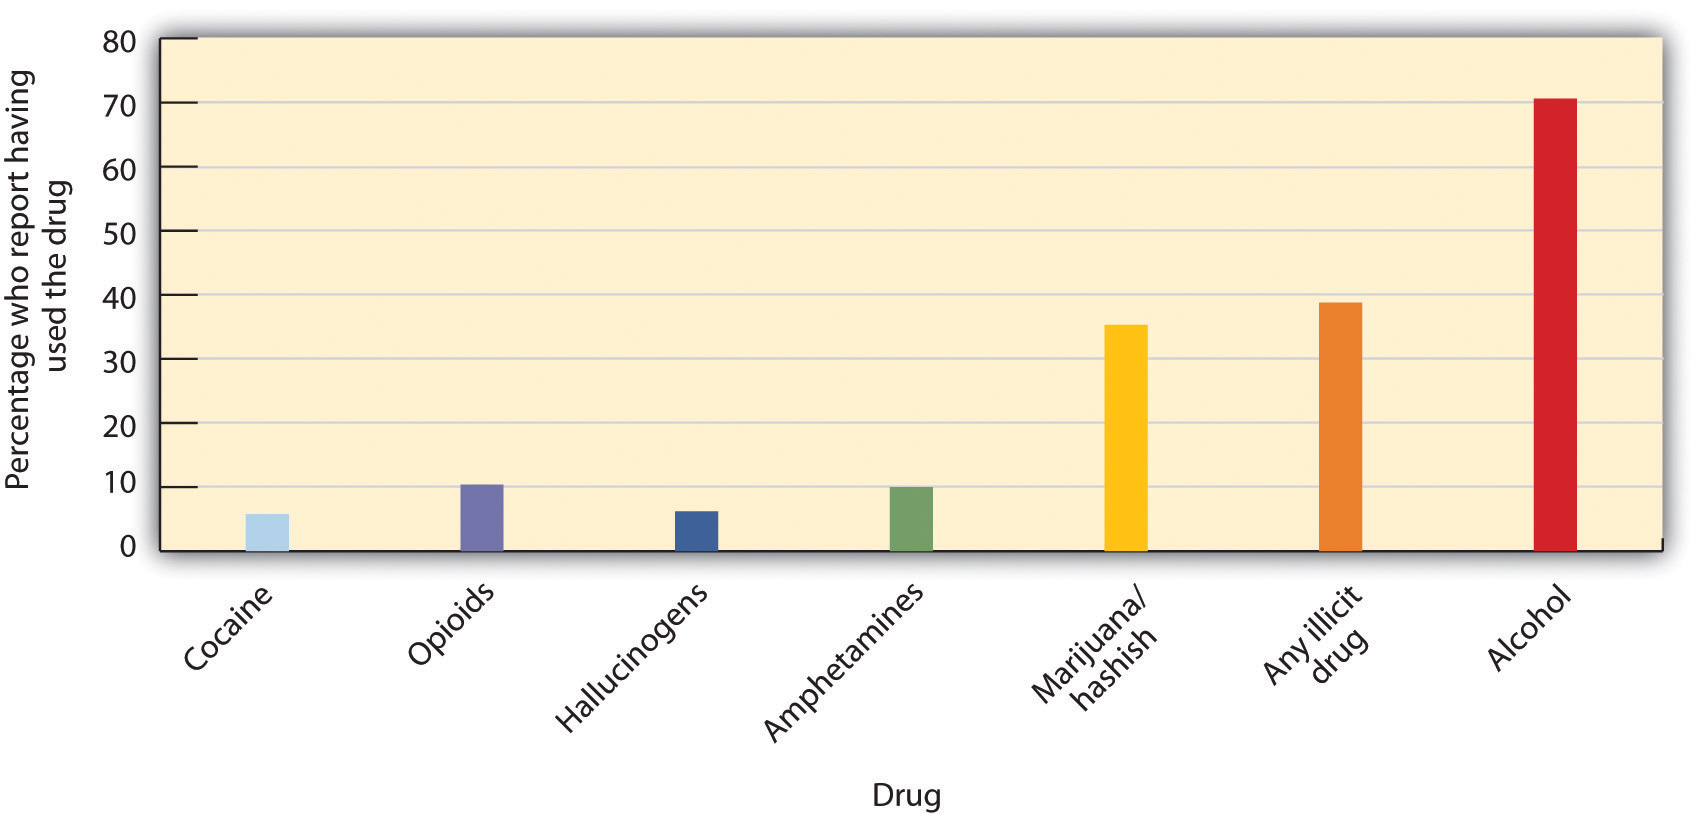 A graph of various drugs used by 12th Graders in 2005. Marijuana/hashish, any illicit drug, and alcohol are 35% and above